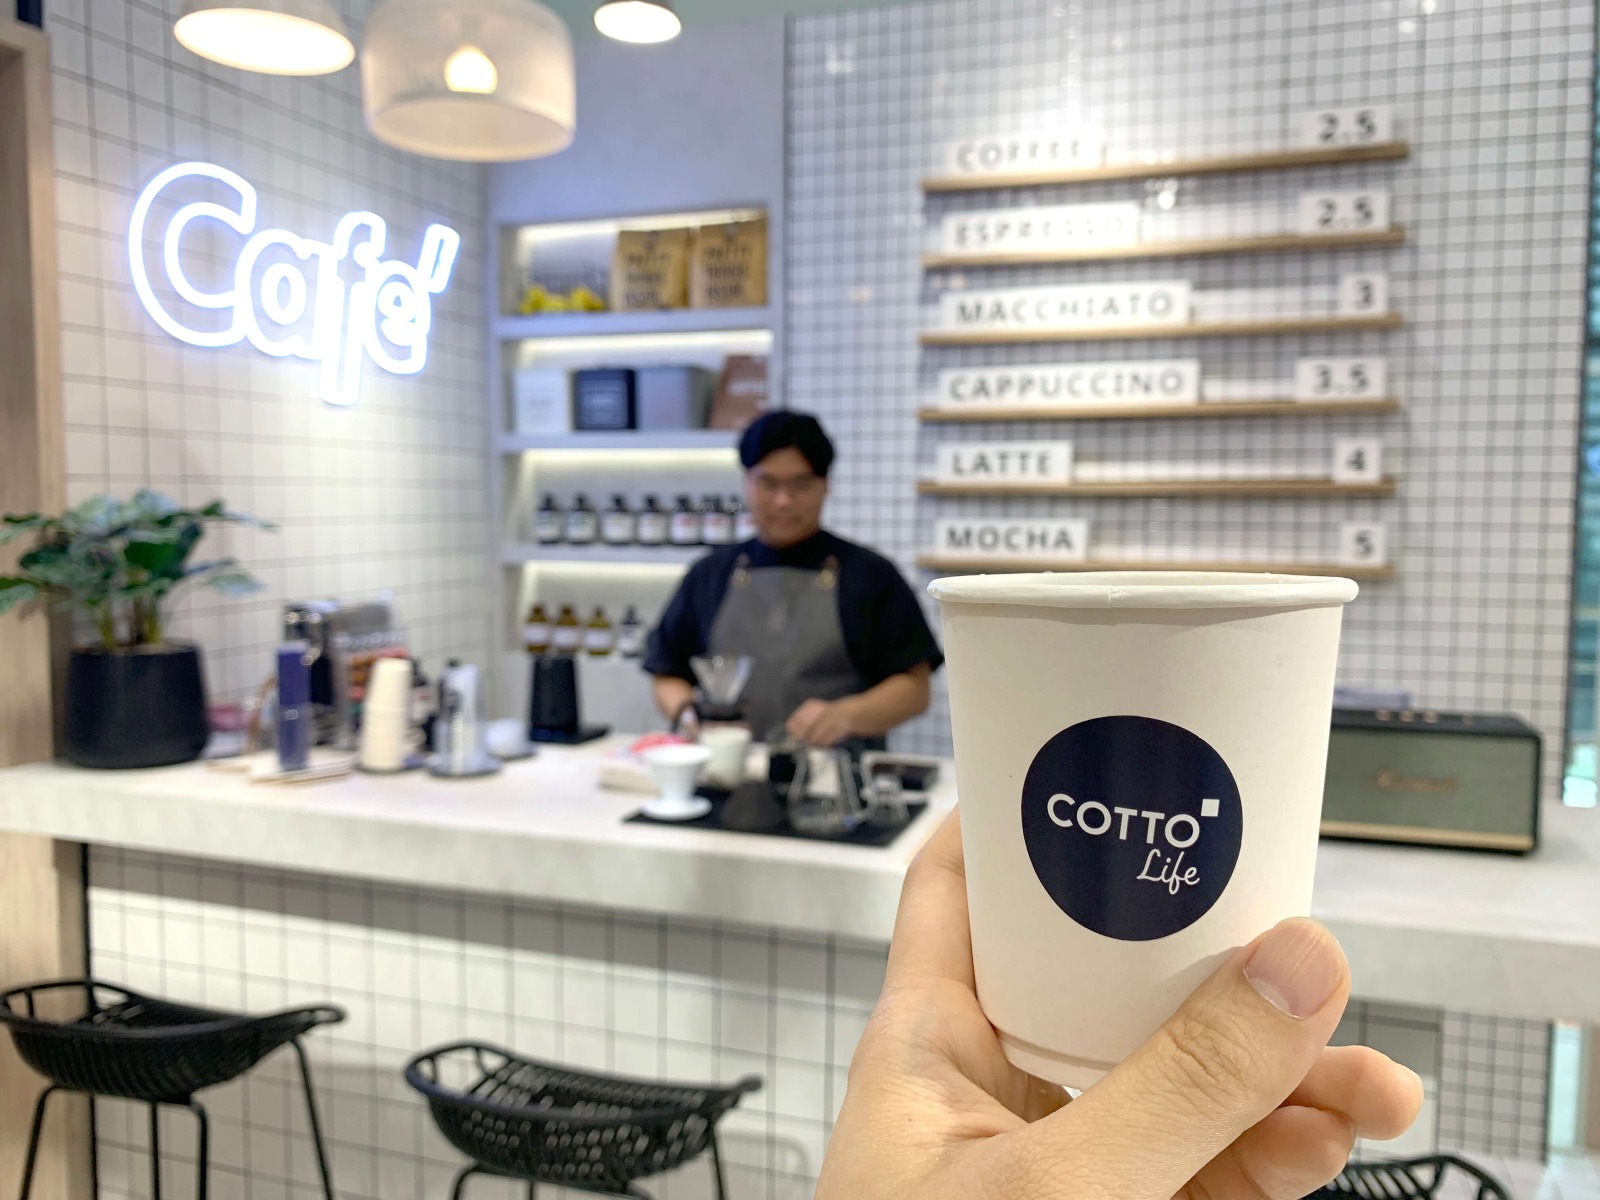 Cotto Cafe in CDC